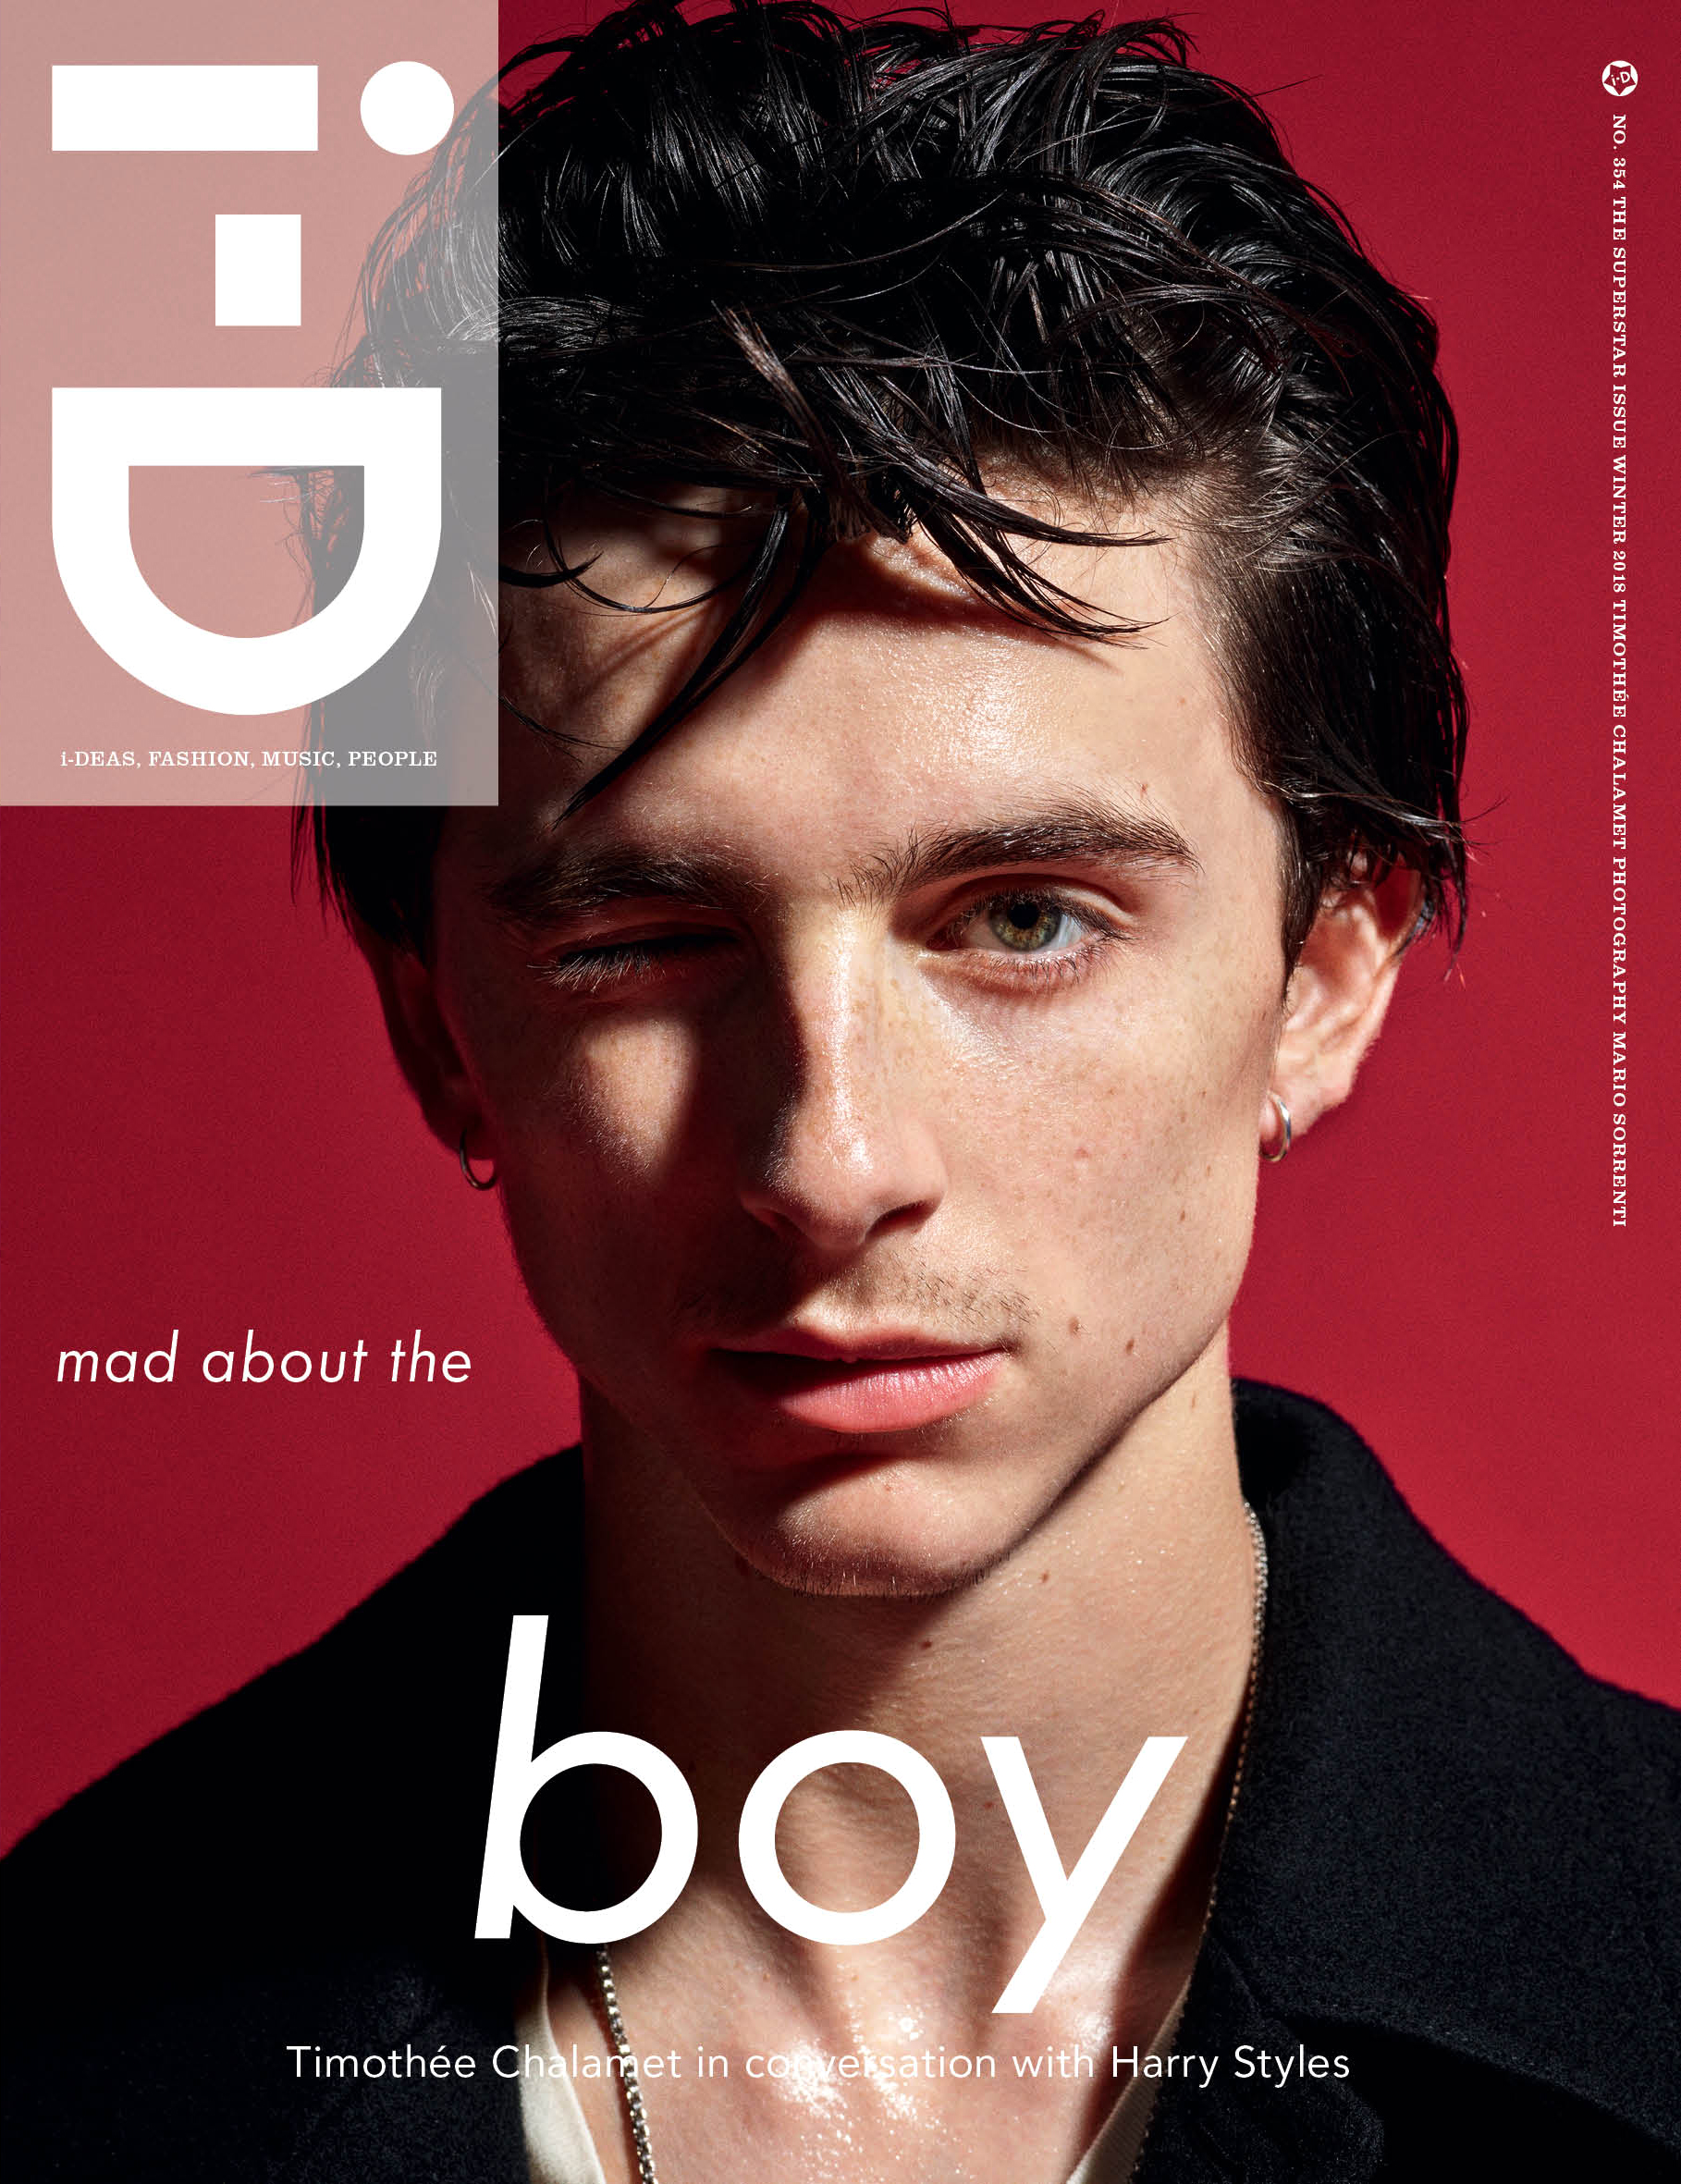 Harry Styles interviews Timothée Chalamet for iD read the full